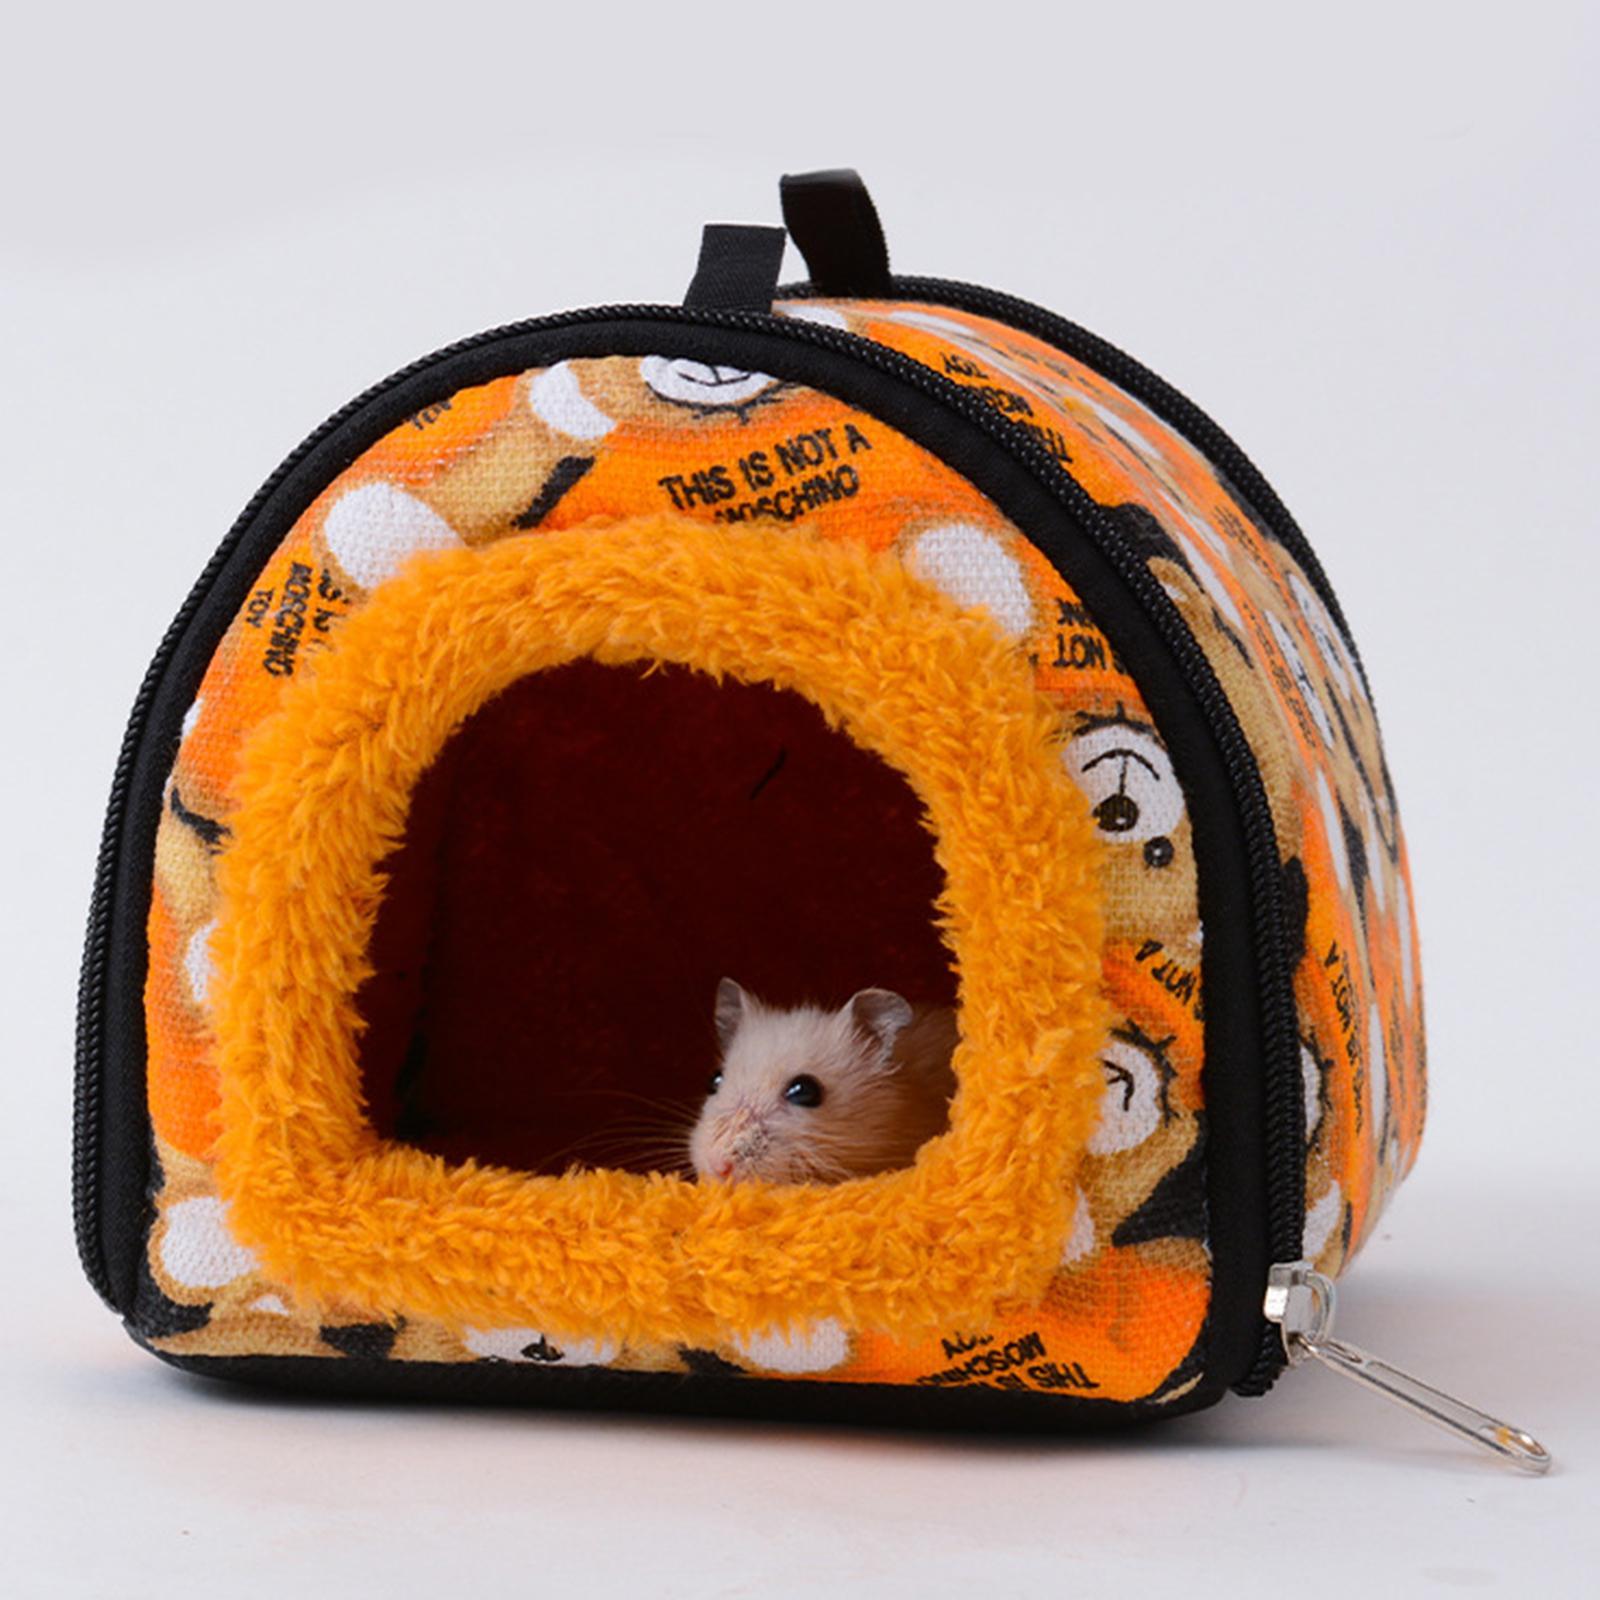 Guinea Pig Bed Nest Hamster House for Sugar Glider Rabbit Small Pet Supplies Brown Bear S